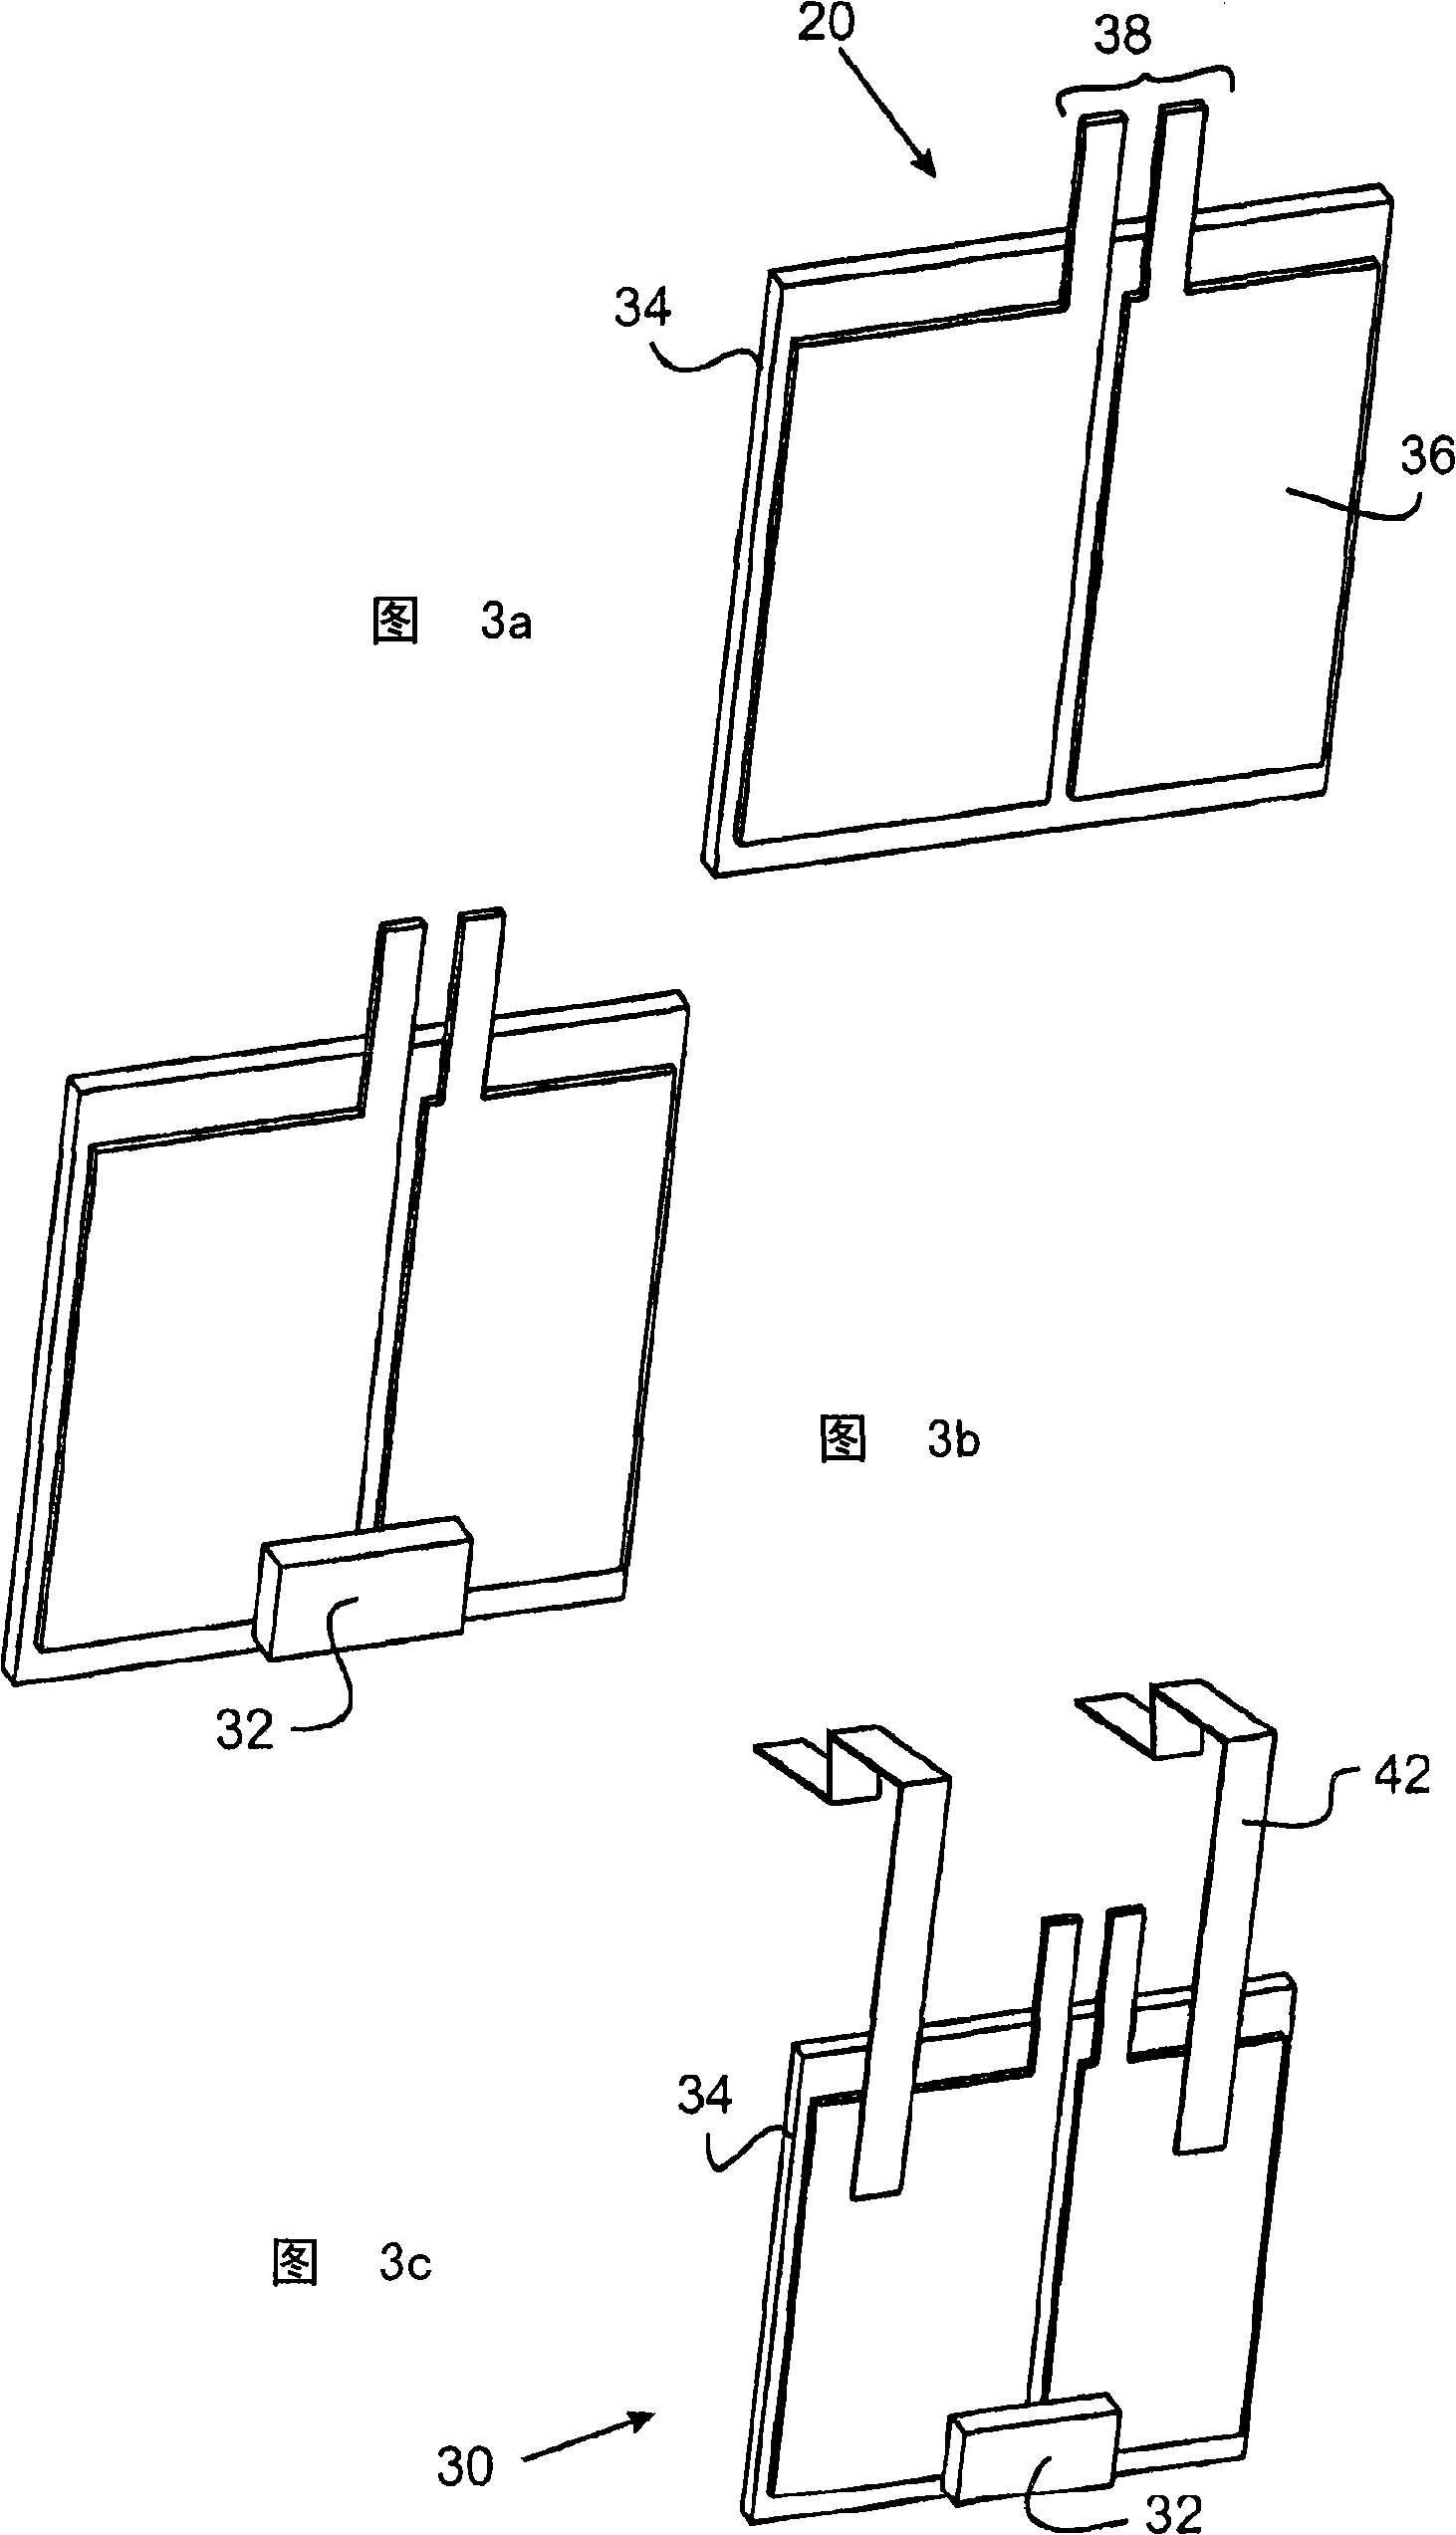 Lighting device and method for directing light